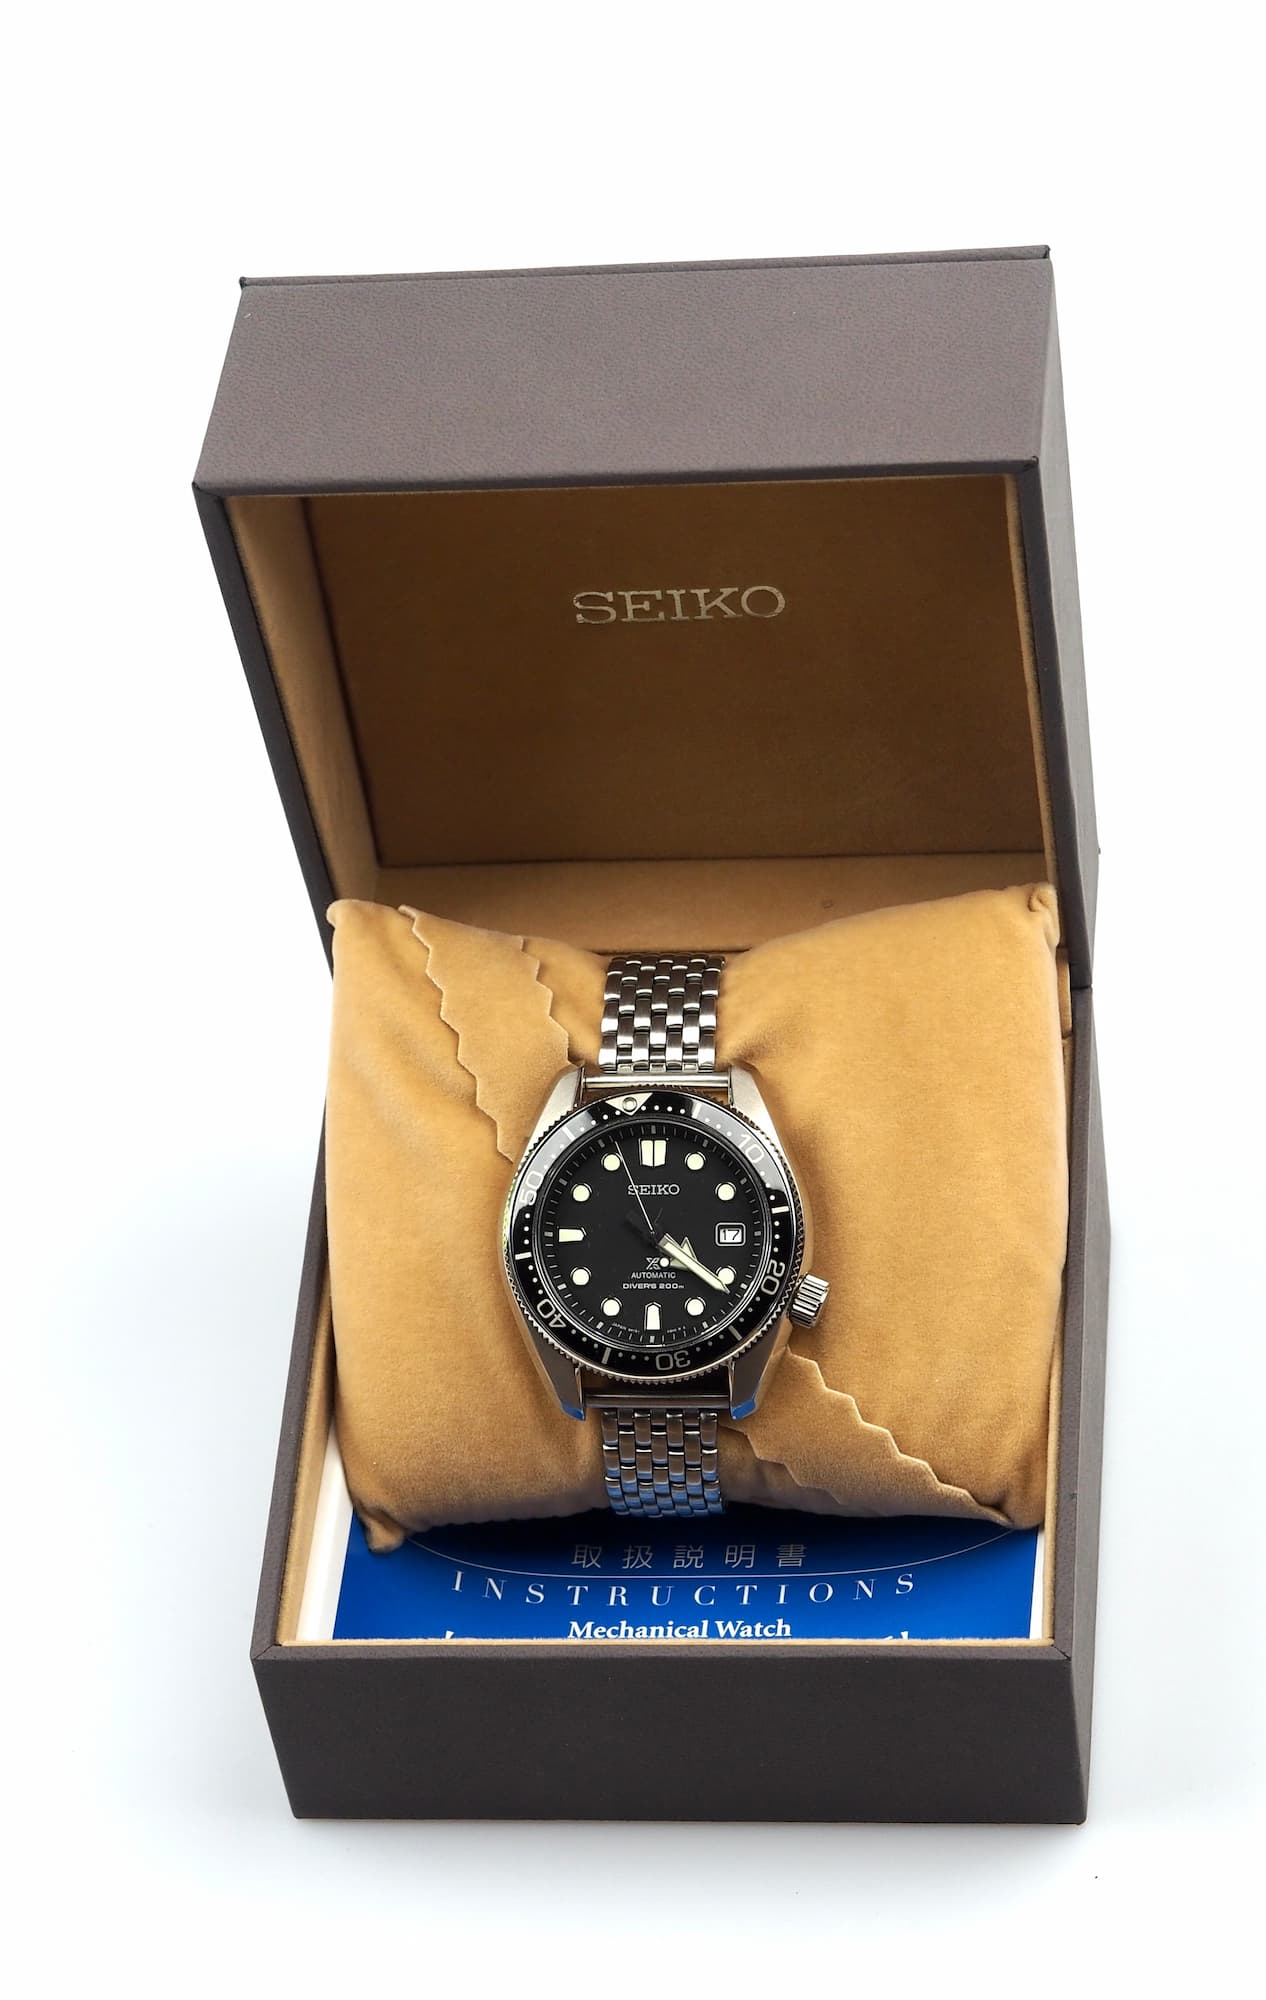 Seiko Prospex SBDC061 Automatic 6R15 200m Diver - Watch Out